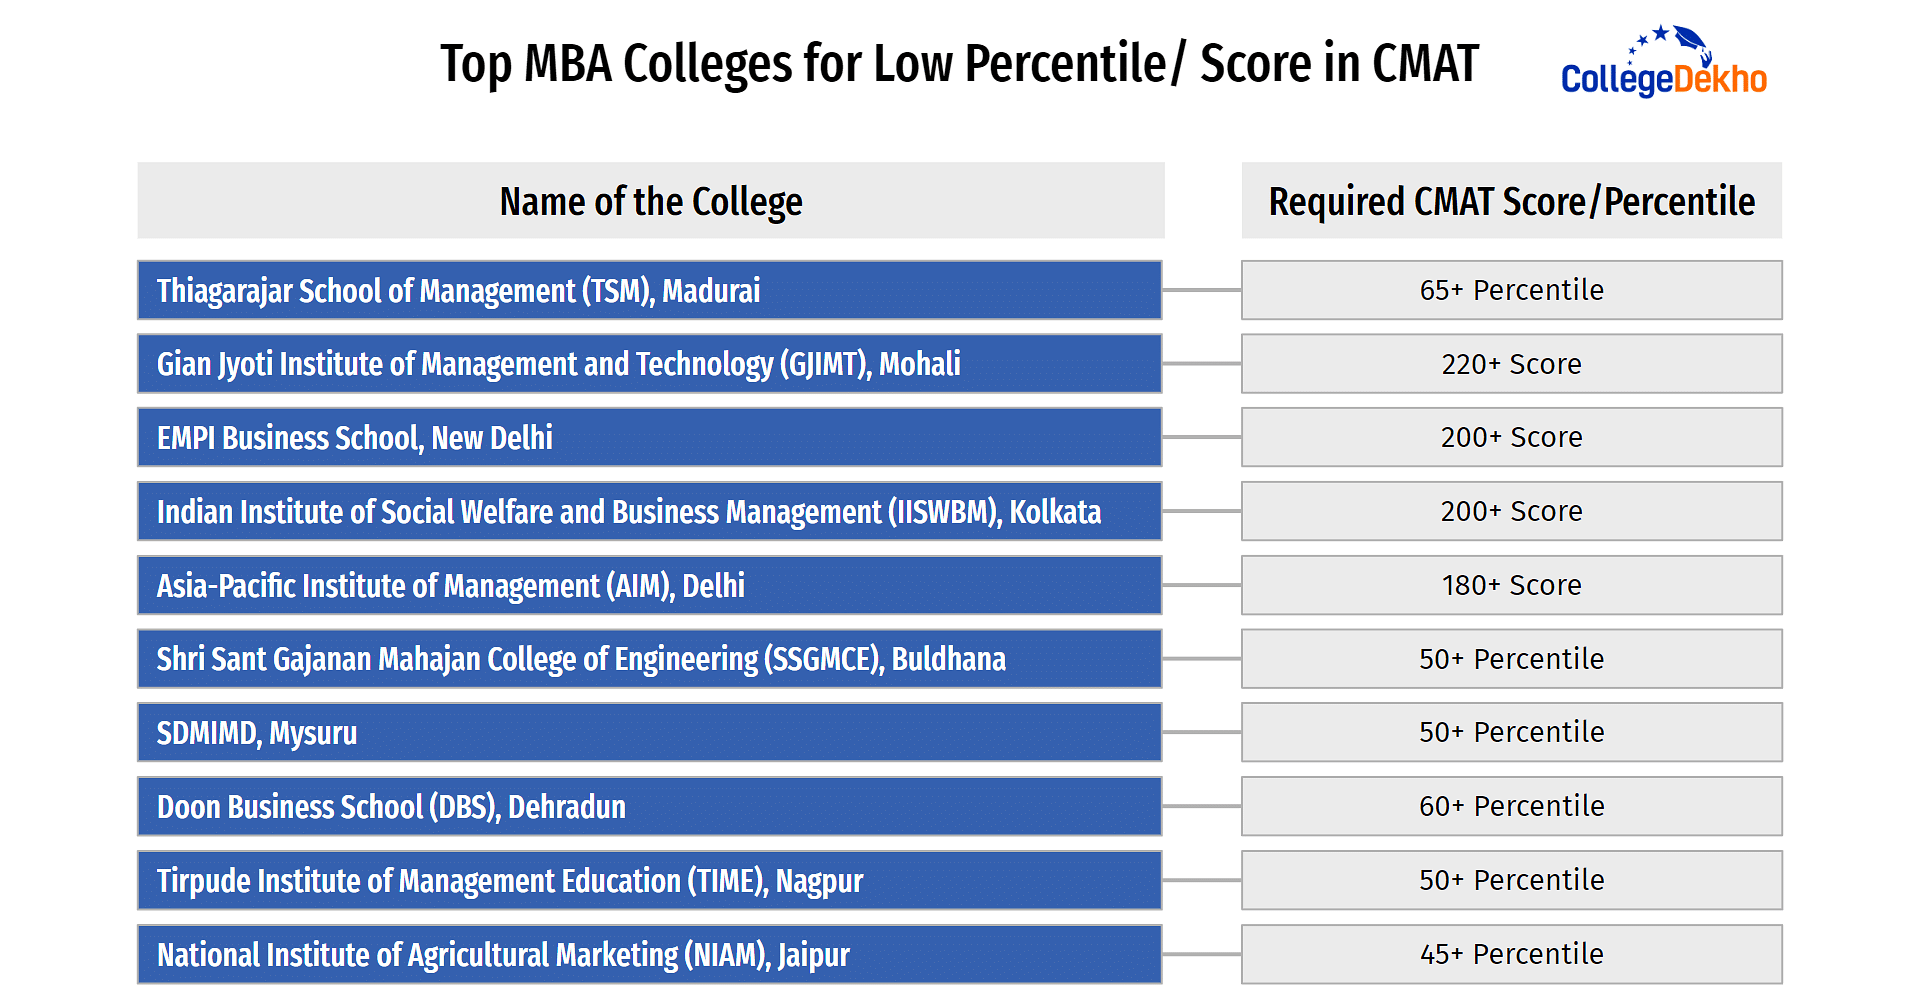 Top MBA Colleges for Low Percentile/ Score in CMAT